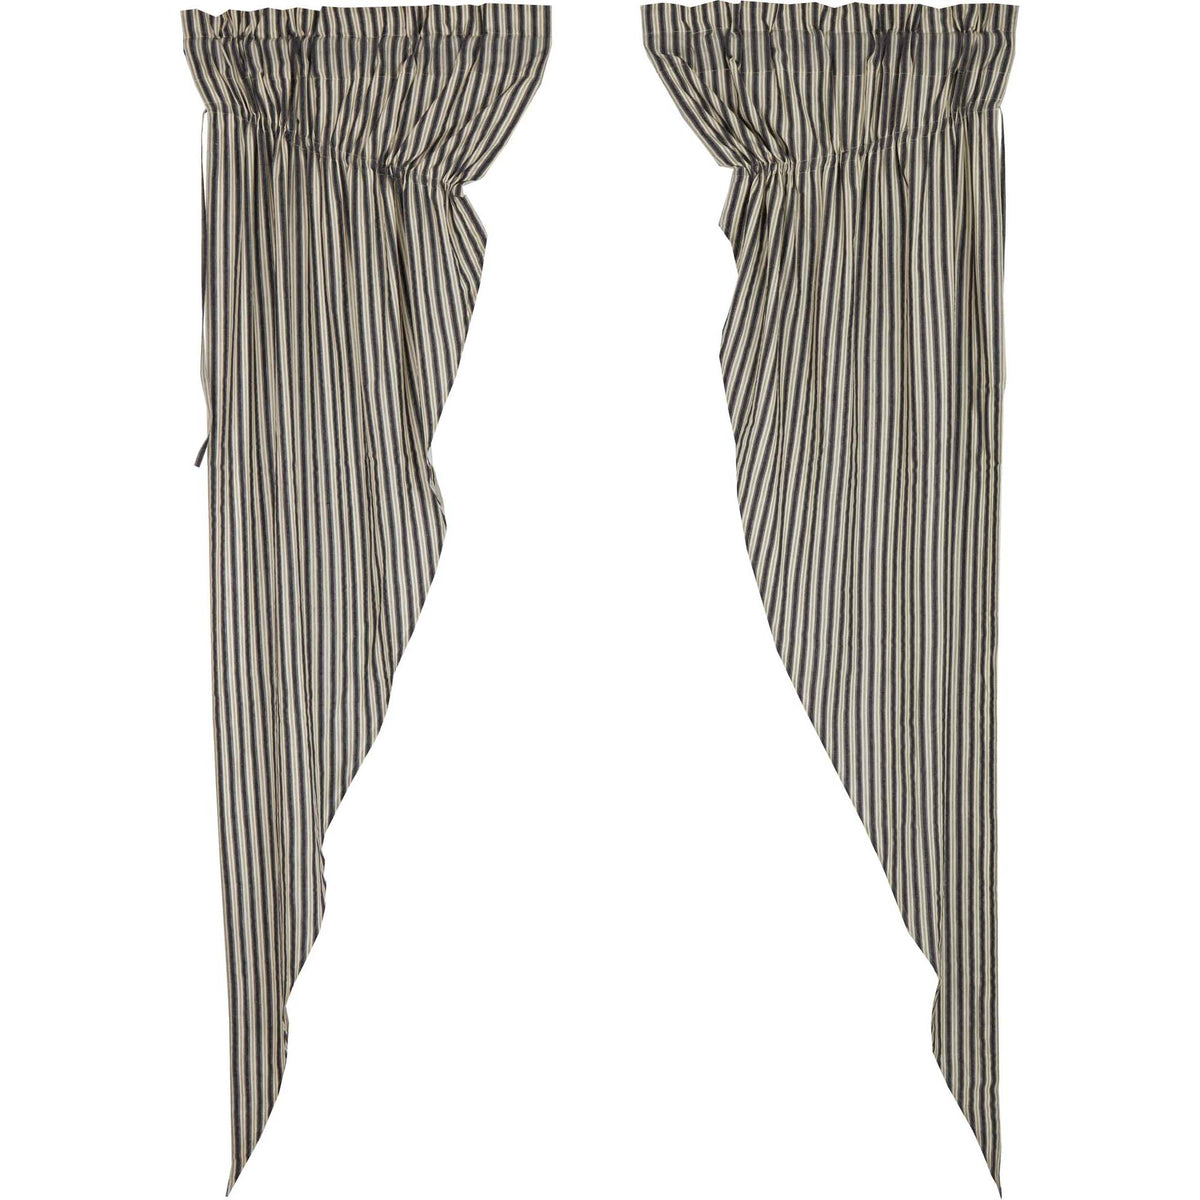 April & Olive Ashmont Ticking Stripe Prairie Long Panel Set of 2 84x36x18 By VHC Brands